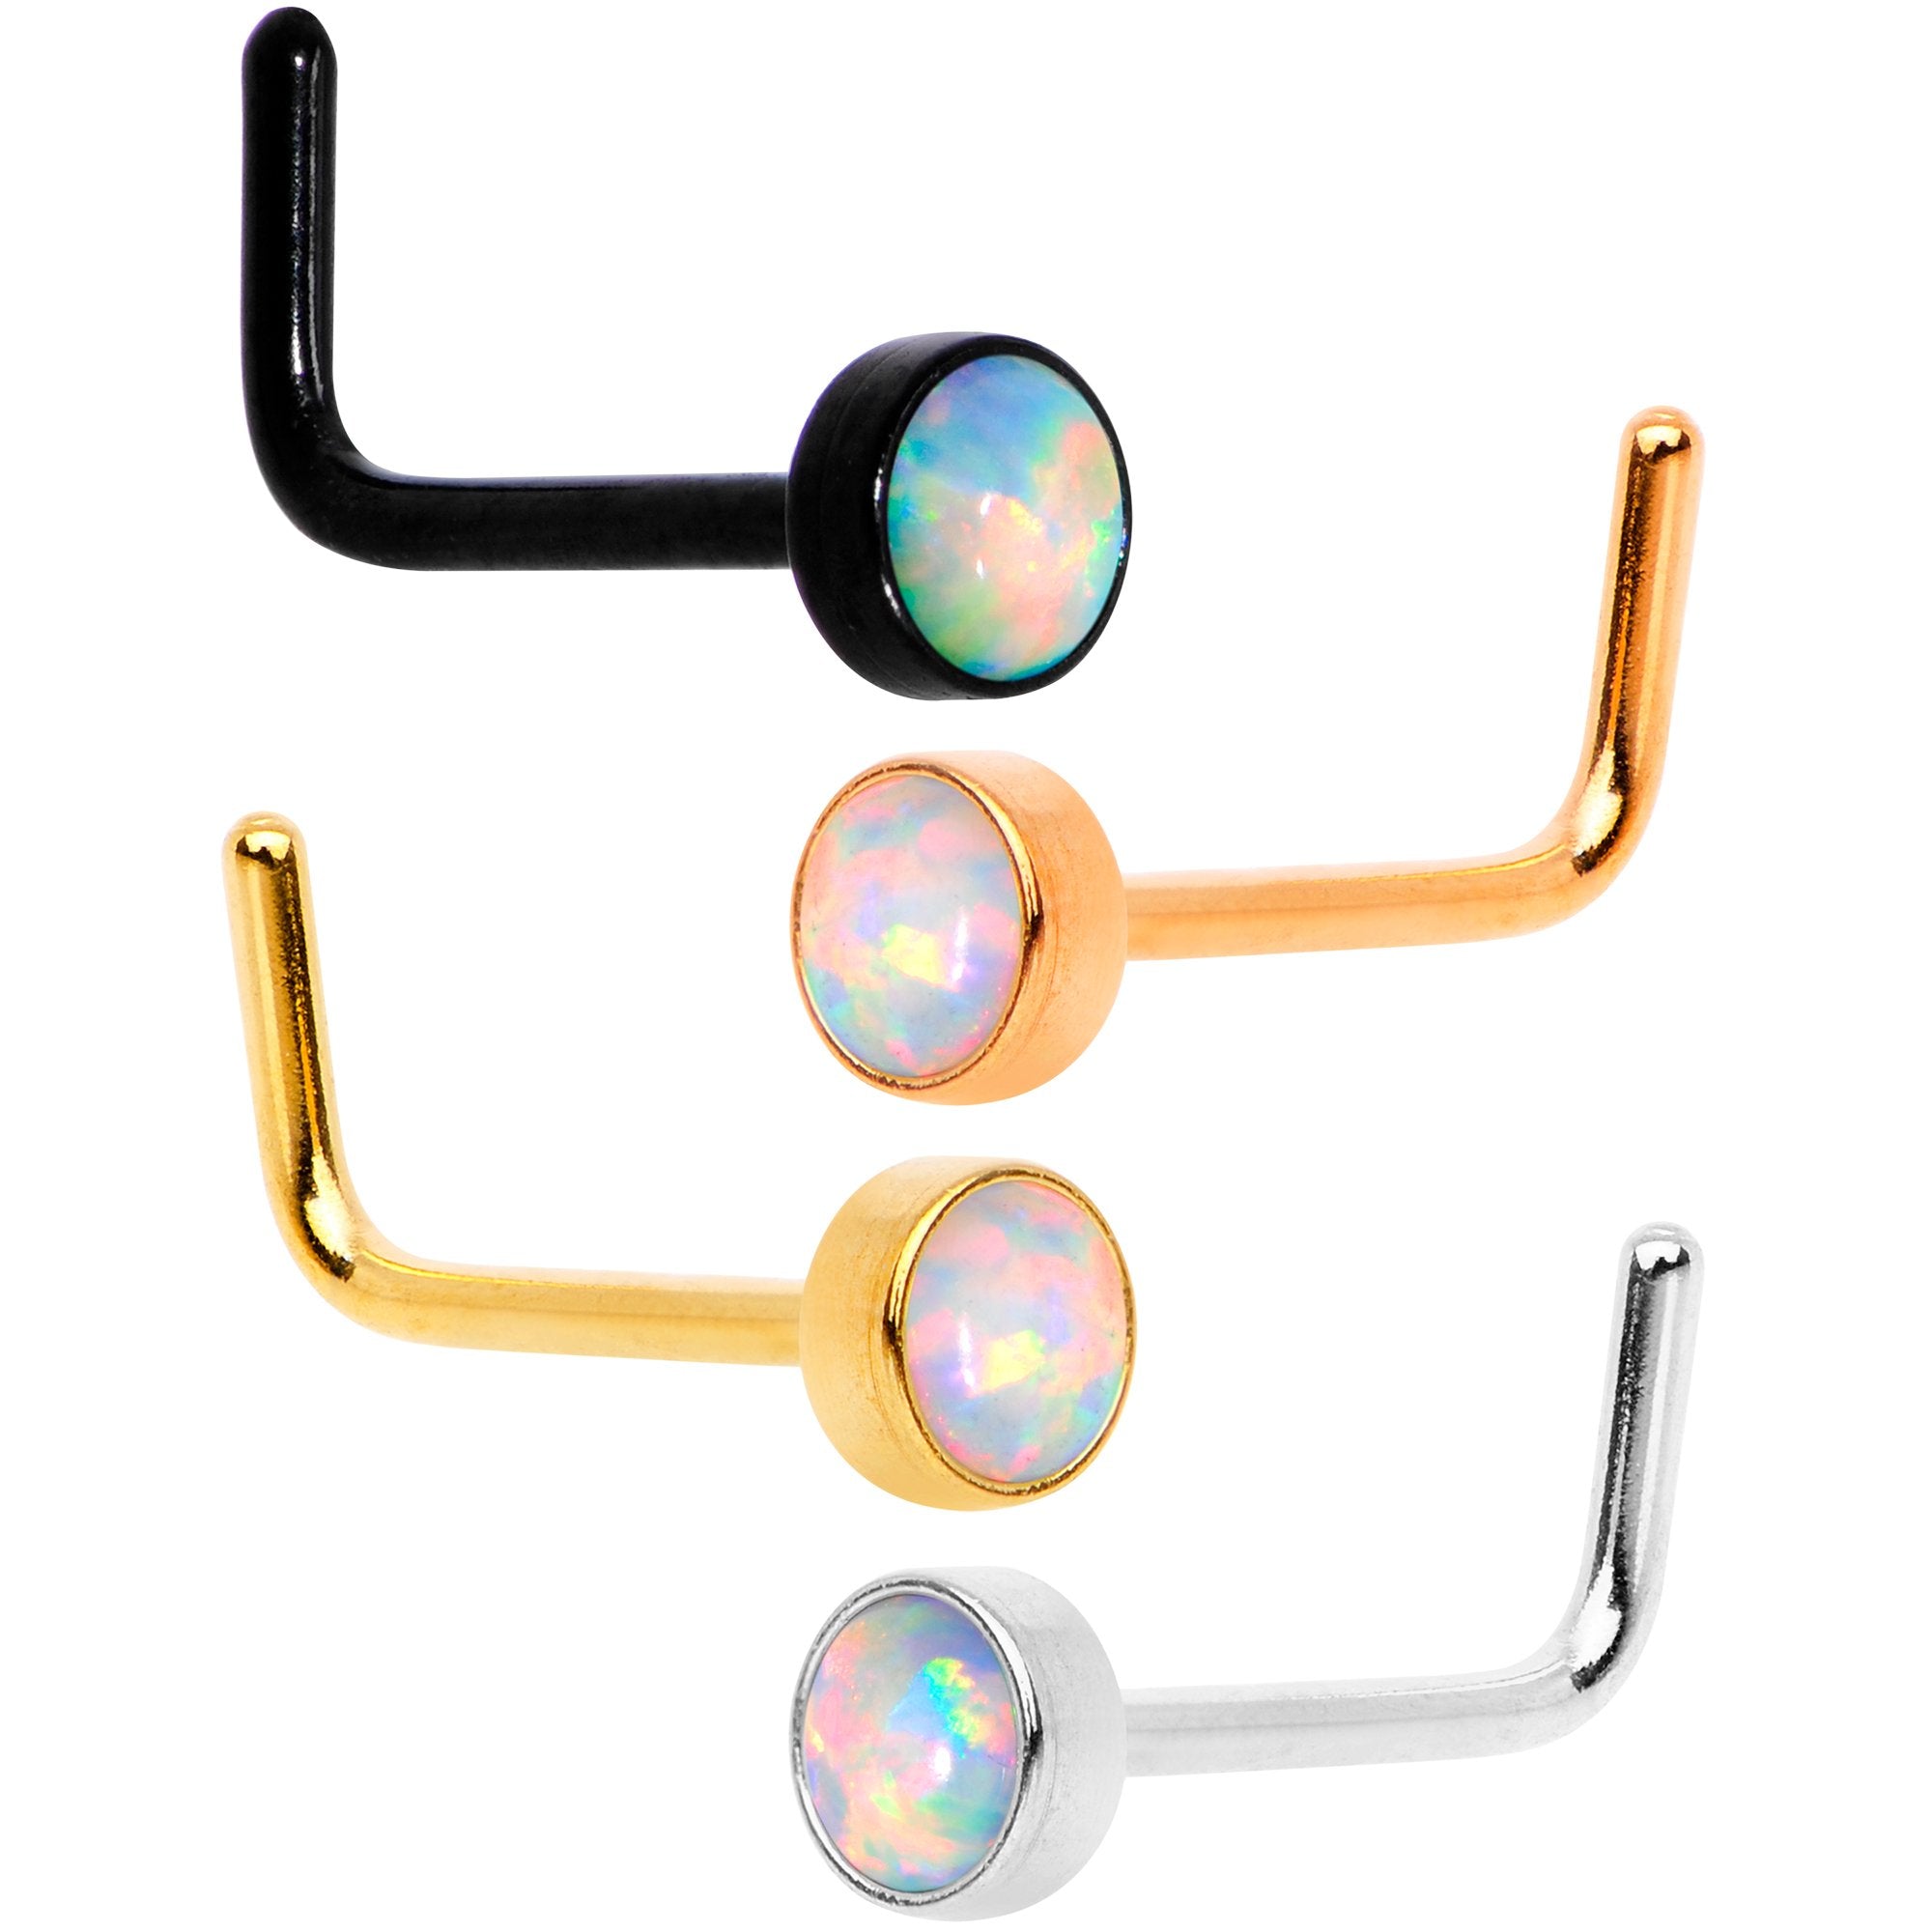 White 3mm Synthetic Opal Anodized Press Fit L Shaped Nose Ring 4 Pack Set